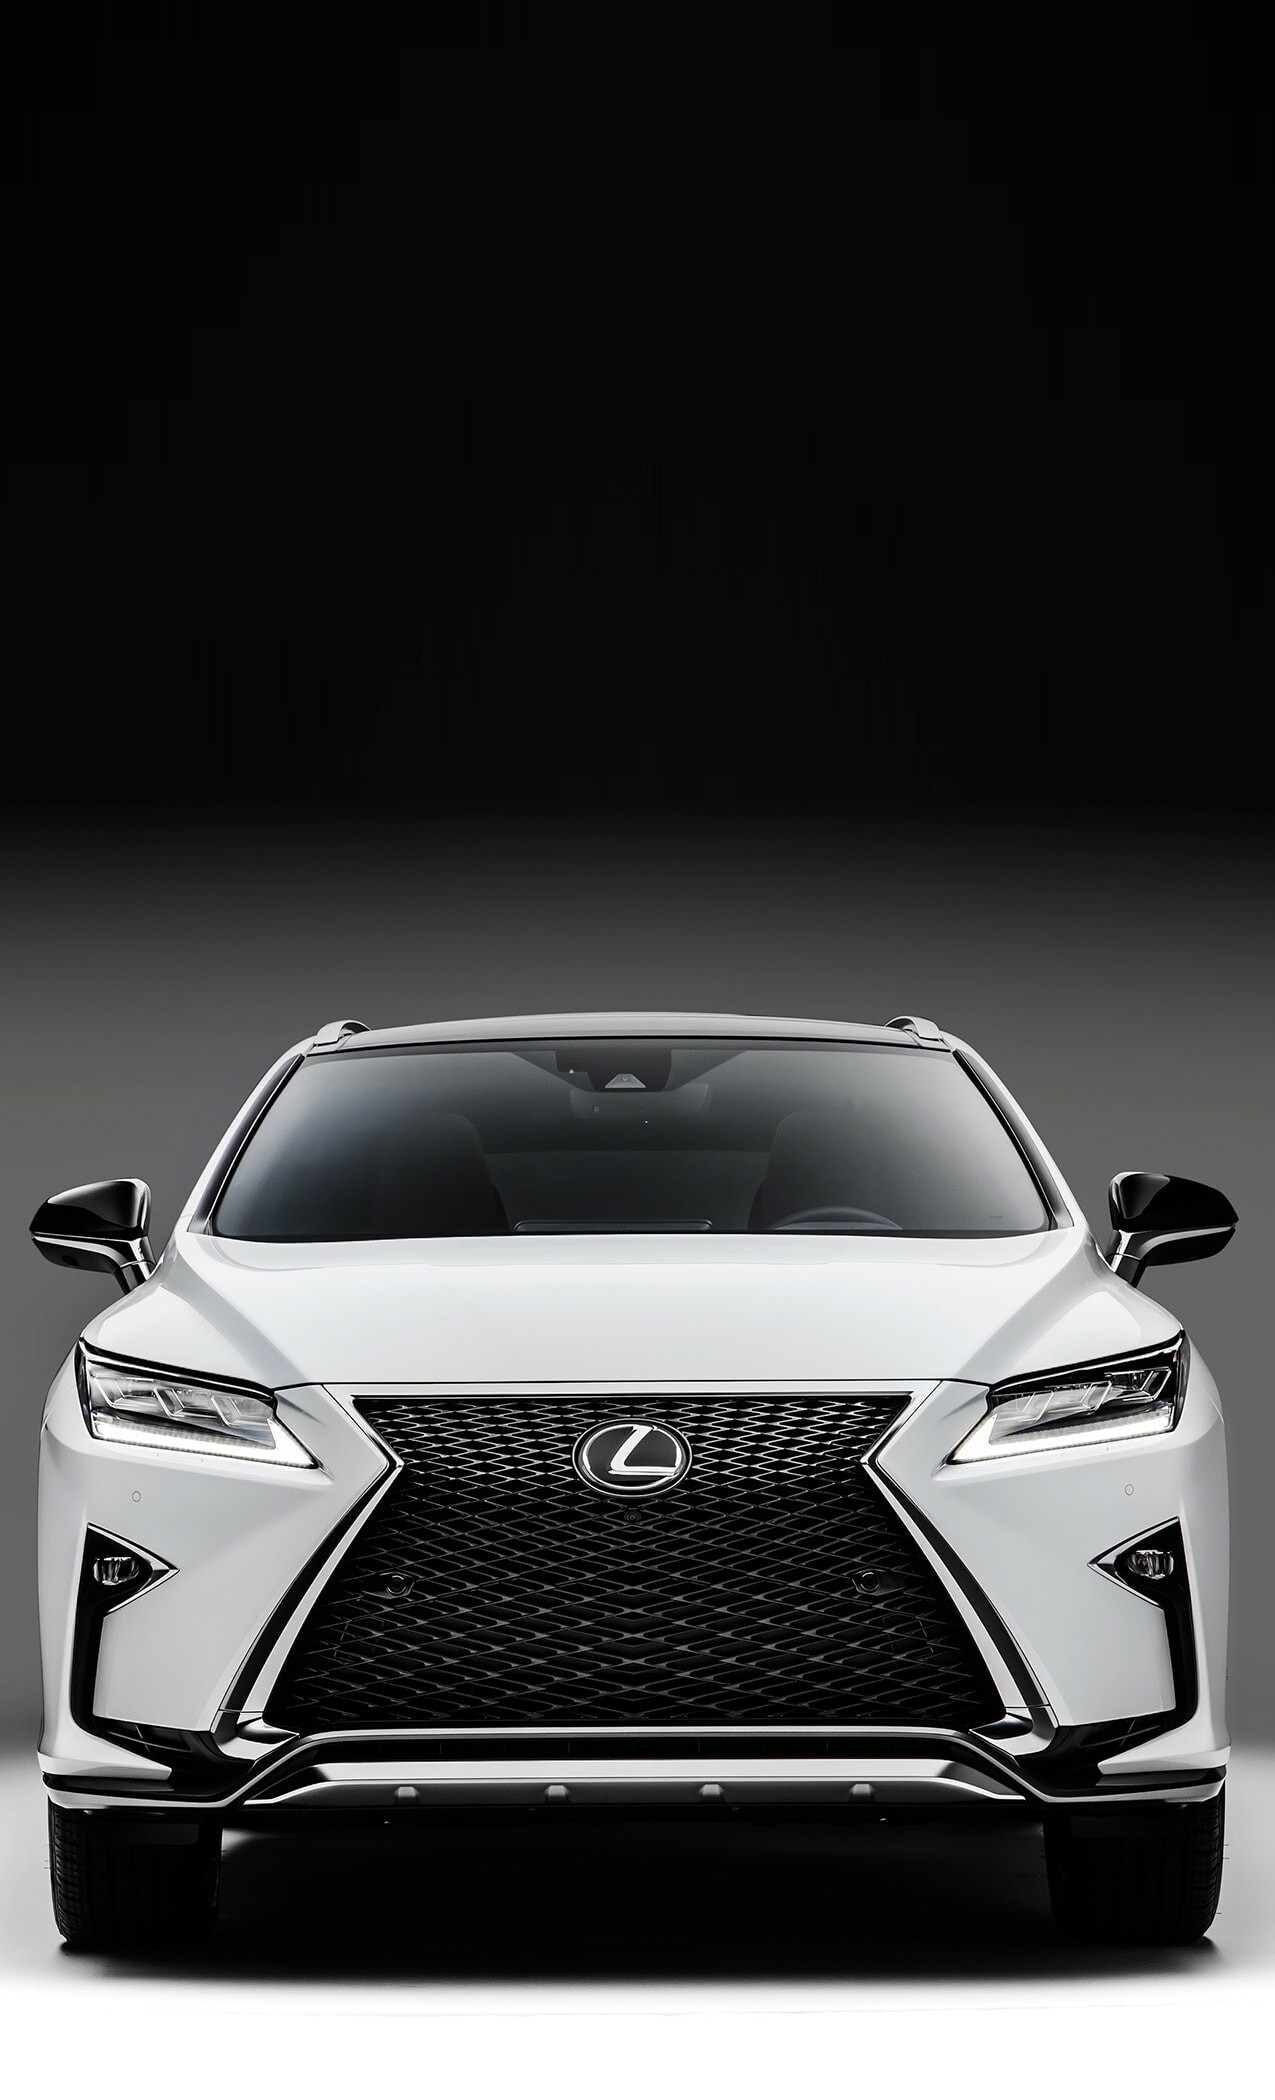 Lexus: One of the most awarded car brands, RX model. 1280x2100 HD Background.